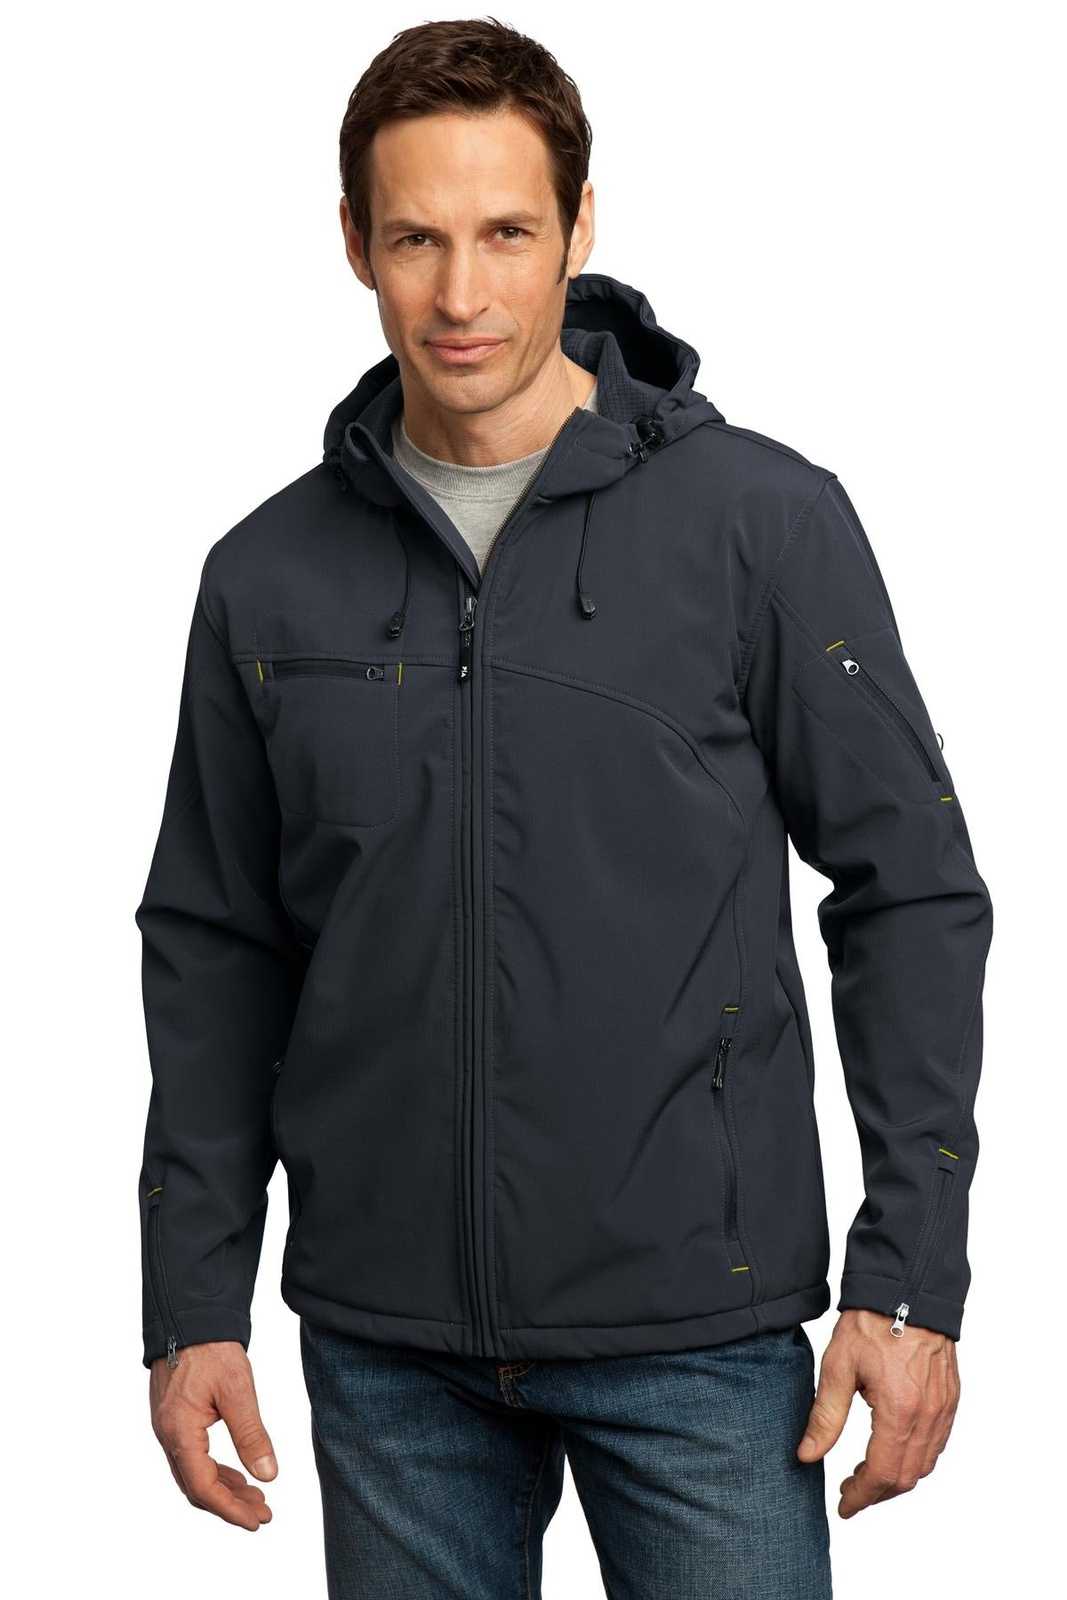 Port Authority J706 Textured Hooded Soft Shell Jacket - Charcoal Lemon Yellow - HIT a Double - 1